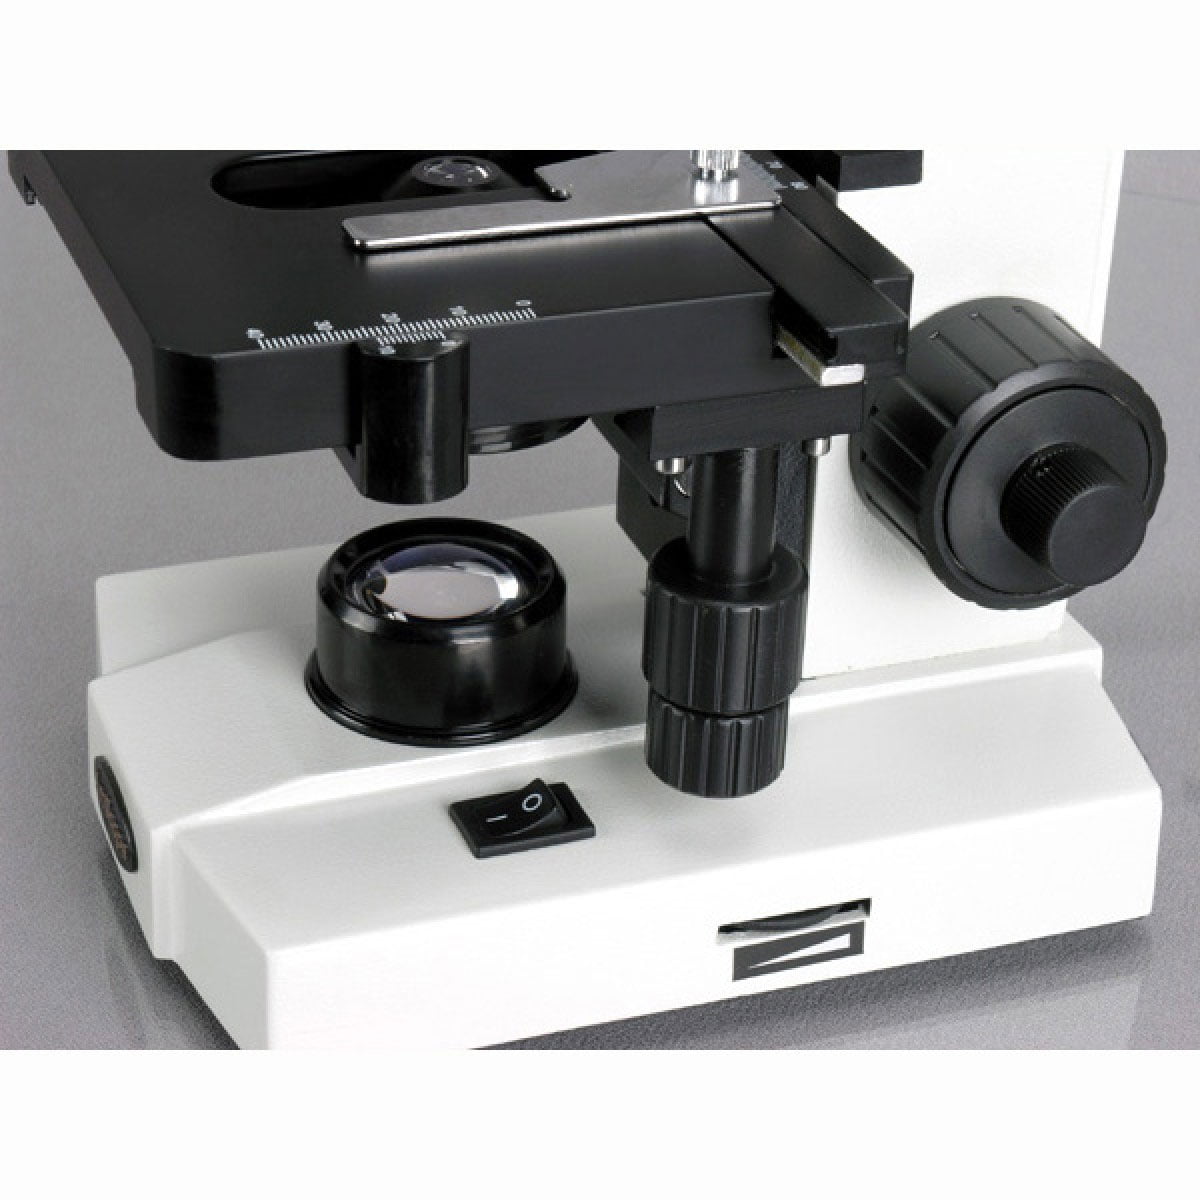 WF10x and WF20x Eyepieces 1.25 NA Abbe Condenser Mechanical Stage AmScope M220B Monocular Compound Microscope Tungsten Illumination 110V Brightfield Coaxial Coarse and Fine Focus 40x-800x Magnification